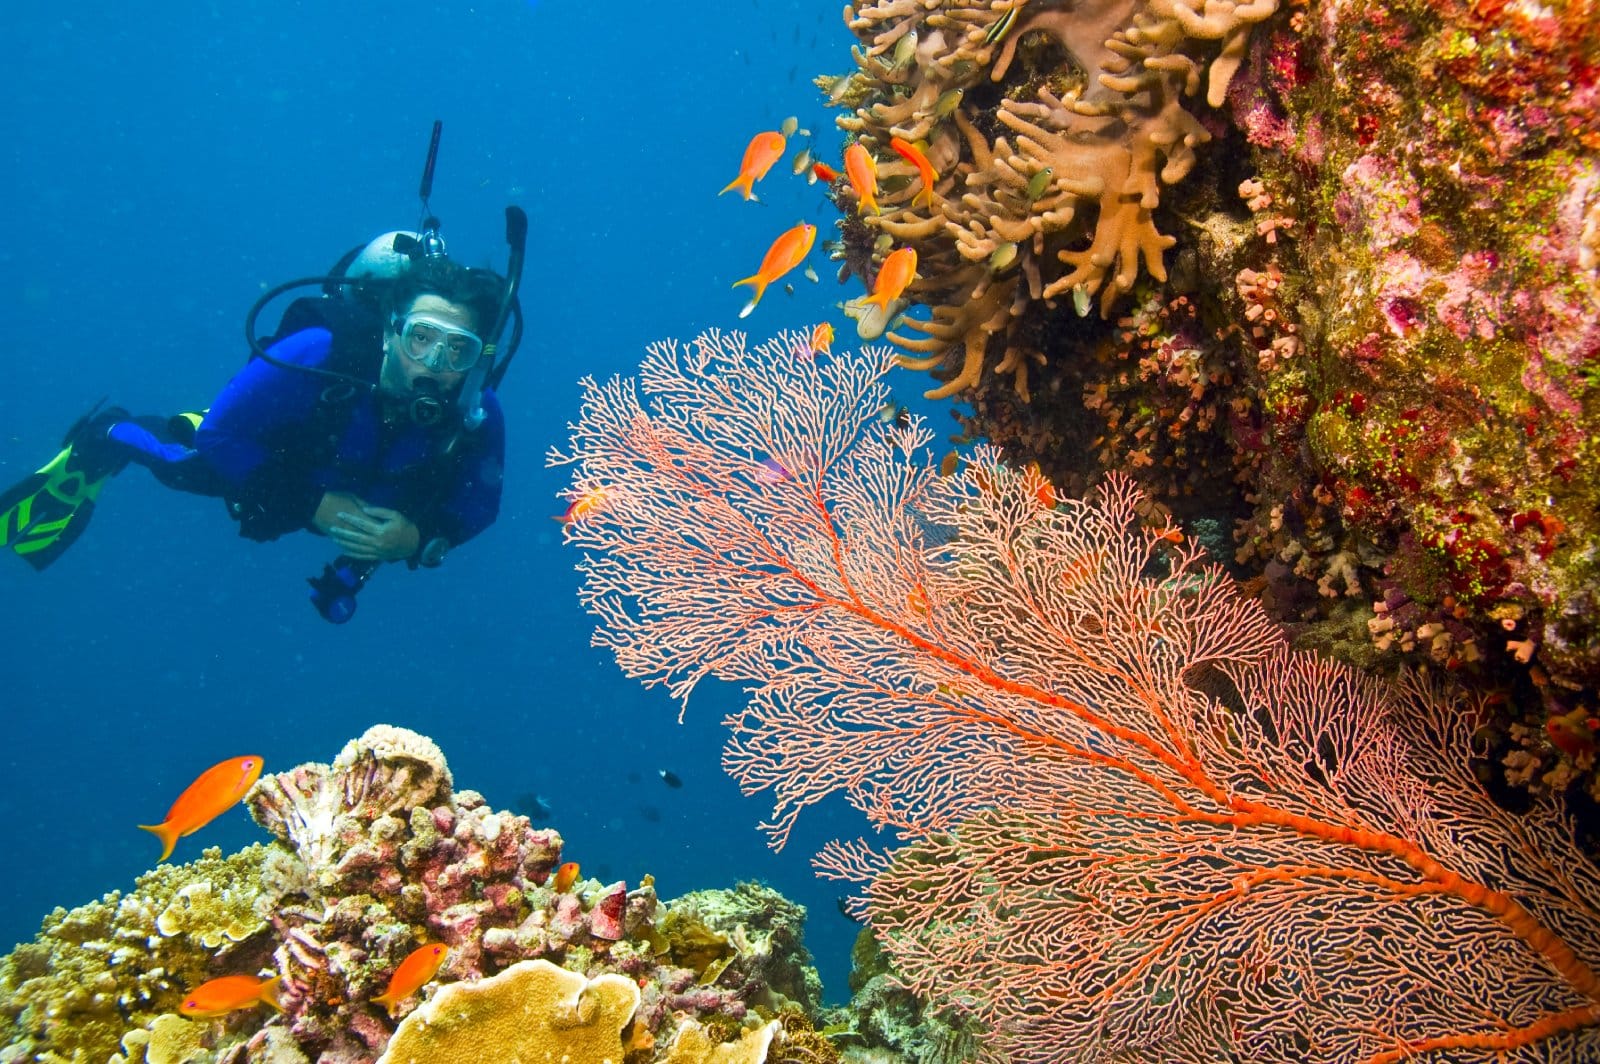 <p class="wp-caption-text">Image Credit: Shutterstock / Debra James</p>  <p><span>The Great Barrier Reef is the world’s largest coral reef system, comprising over 2,900 individual reefs and 900 islands stretching over 2,300 kilometers. This UNESCO World Heritage site is home to an extraordinary diversity of marine life, including over 1,500 species of fish, 400 species of coral, and a myriad of other marine creatures.</span></p> <p><span>The reef’s vast size means snorkeling spots are suitable for all experience levels, from shallow, calm waters for beginners to more challenging sites with strong currents for experienced snorkelers.</span></p> <p><b>Insider’s Tip: </b><span>Visit the outer reef for the clearest water and most vibrant coral formations. Many operators offer eco-friendly tours that contribute to reef conservation efforts.</span></p> <p><b>When to Travel: </b><span>The best time to visit is from June to October, during the Australian winter, when the water is clearest and snorkeling conditions are optimal.</span></p> <p><b>How to Get There: </b><span>Fly into Cairns, the gateway to the Great Barrier Reef, with international connections through major Australian cities. From Cairns, numerous tour operators offer snorkeling trips to various parts of the reef.</span></p>